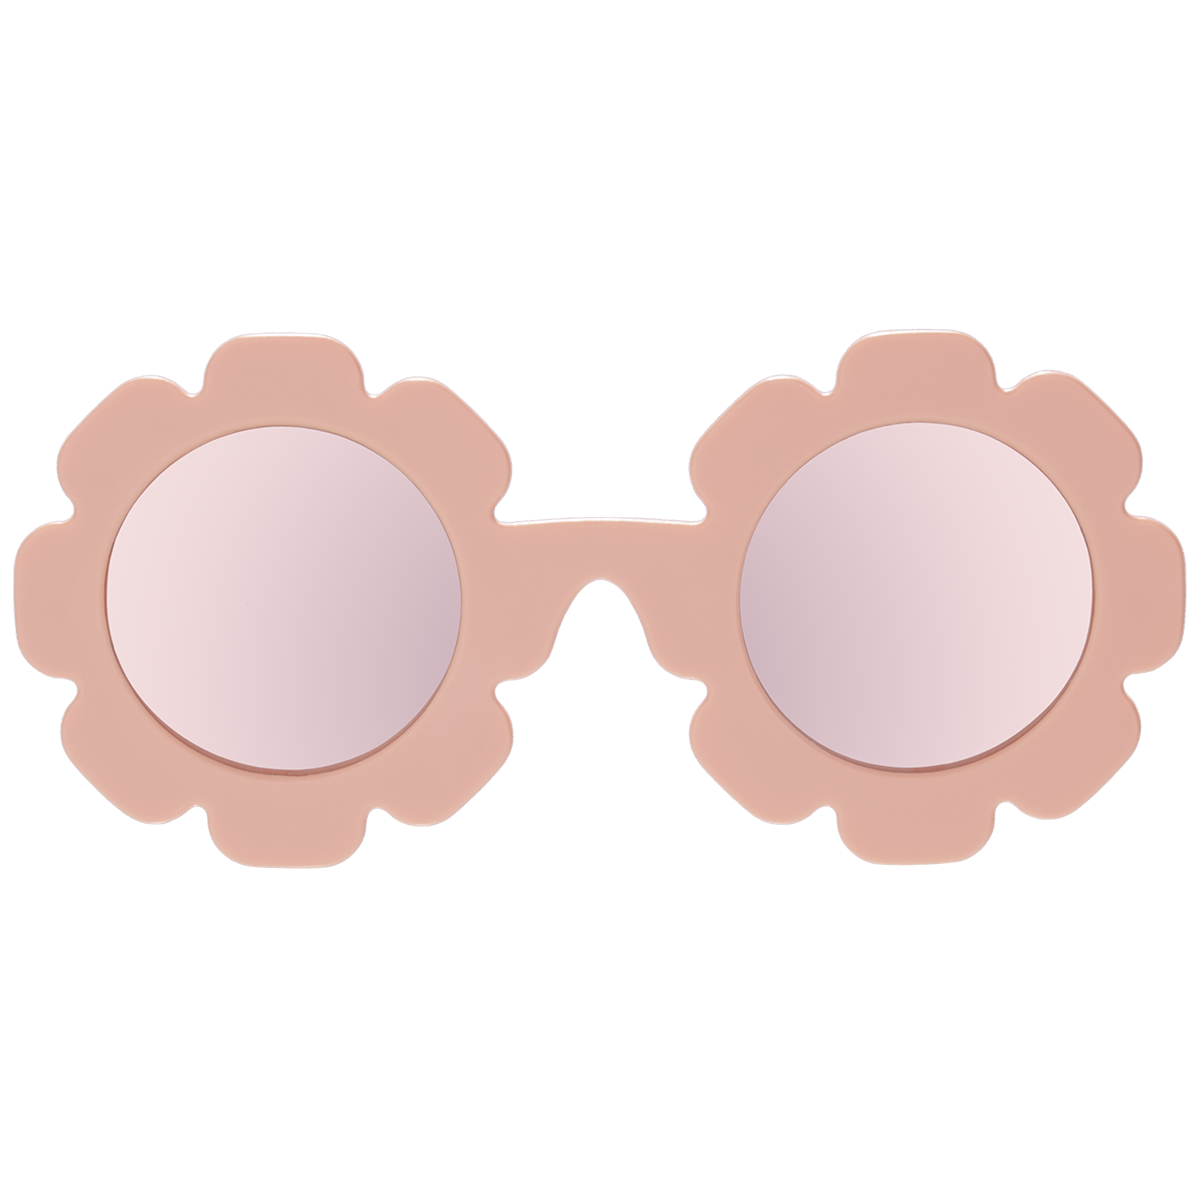 The Flower Child- Polarized with Mirrored Lenses